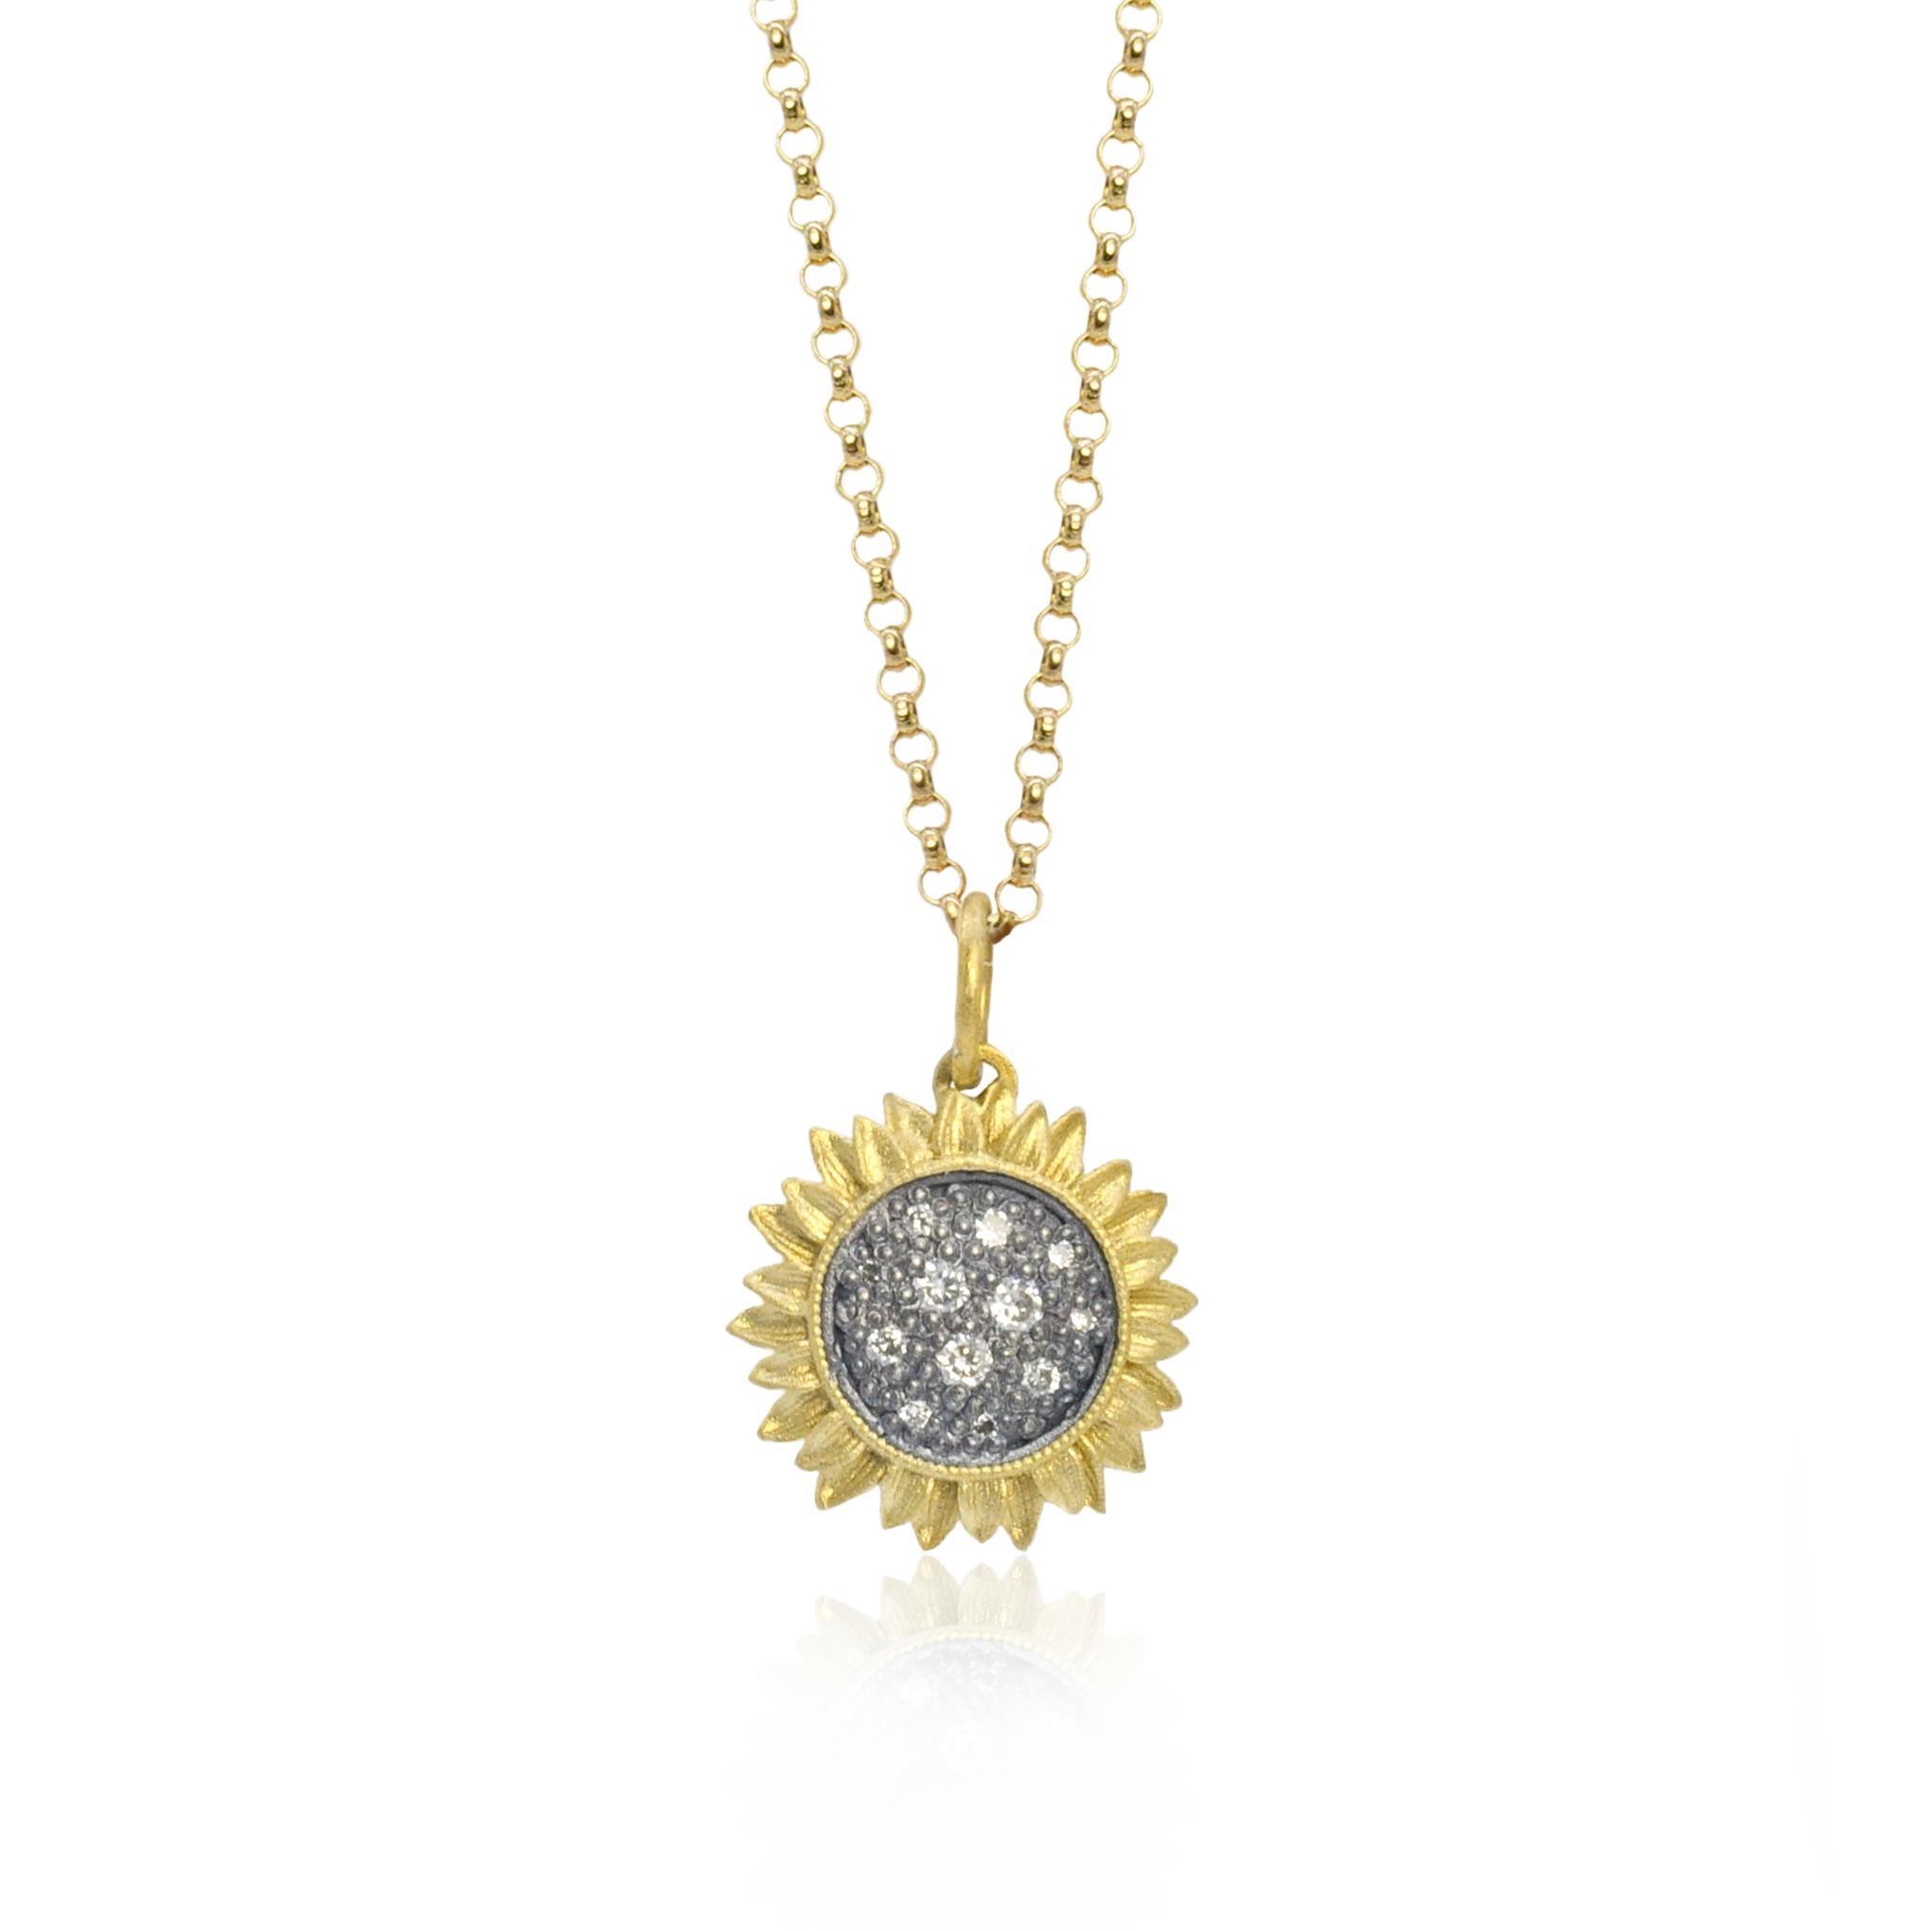 Sunflower Necklace with Pave Set Diamonds in Oxidized Silver, Tiny In New Condition For Sale In Baltimore, MD